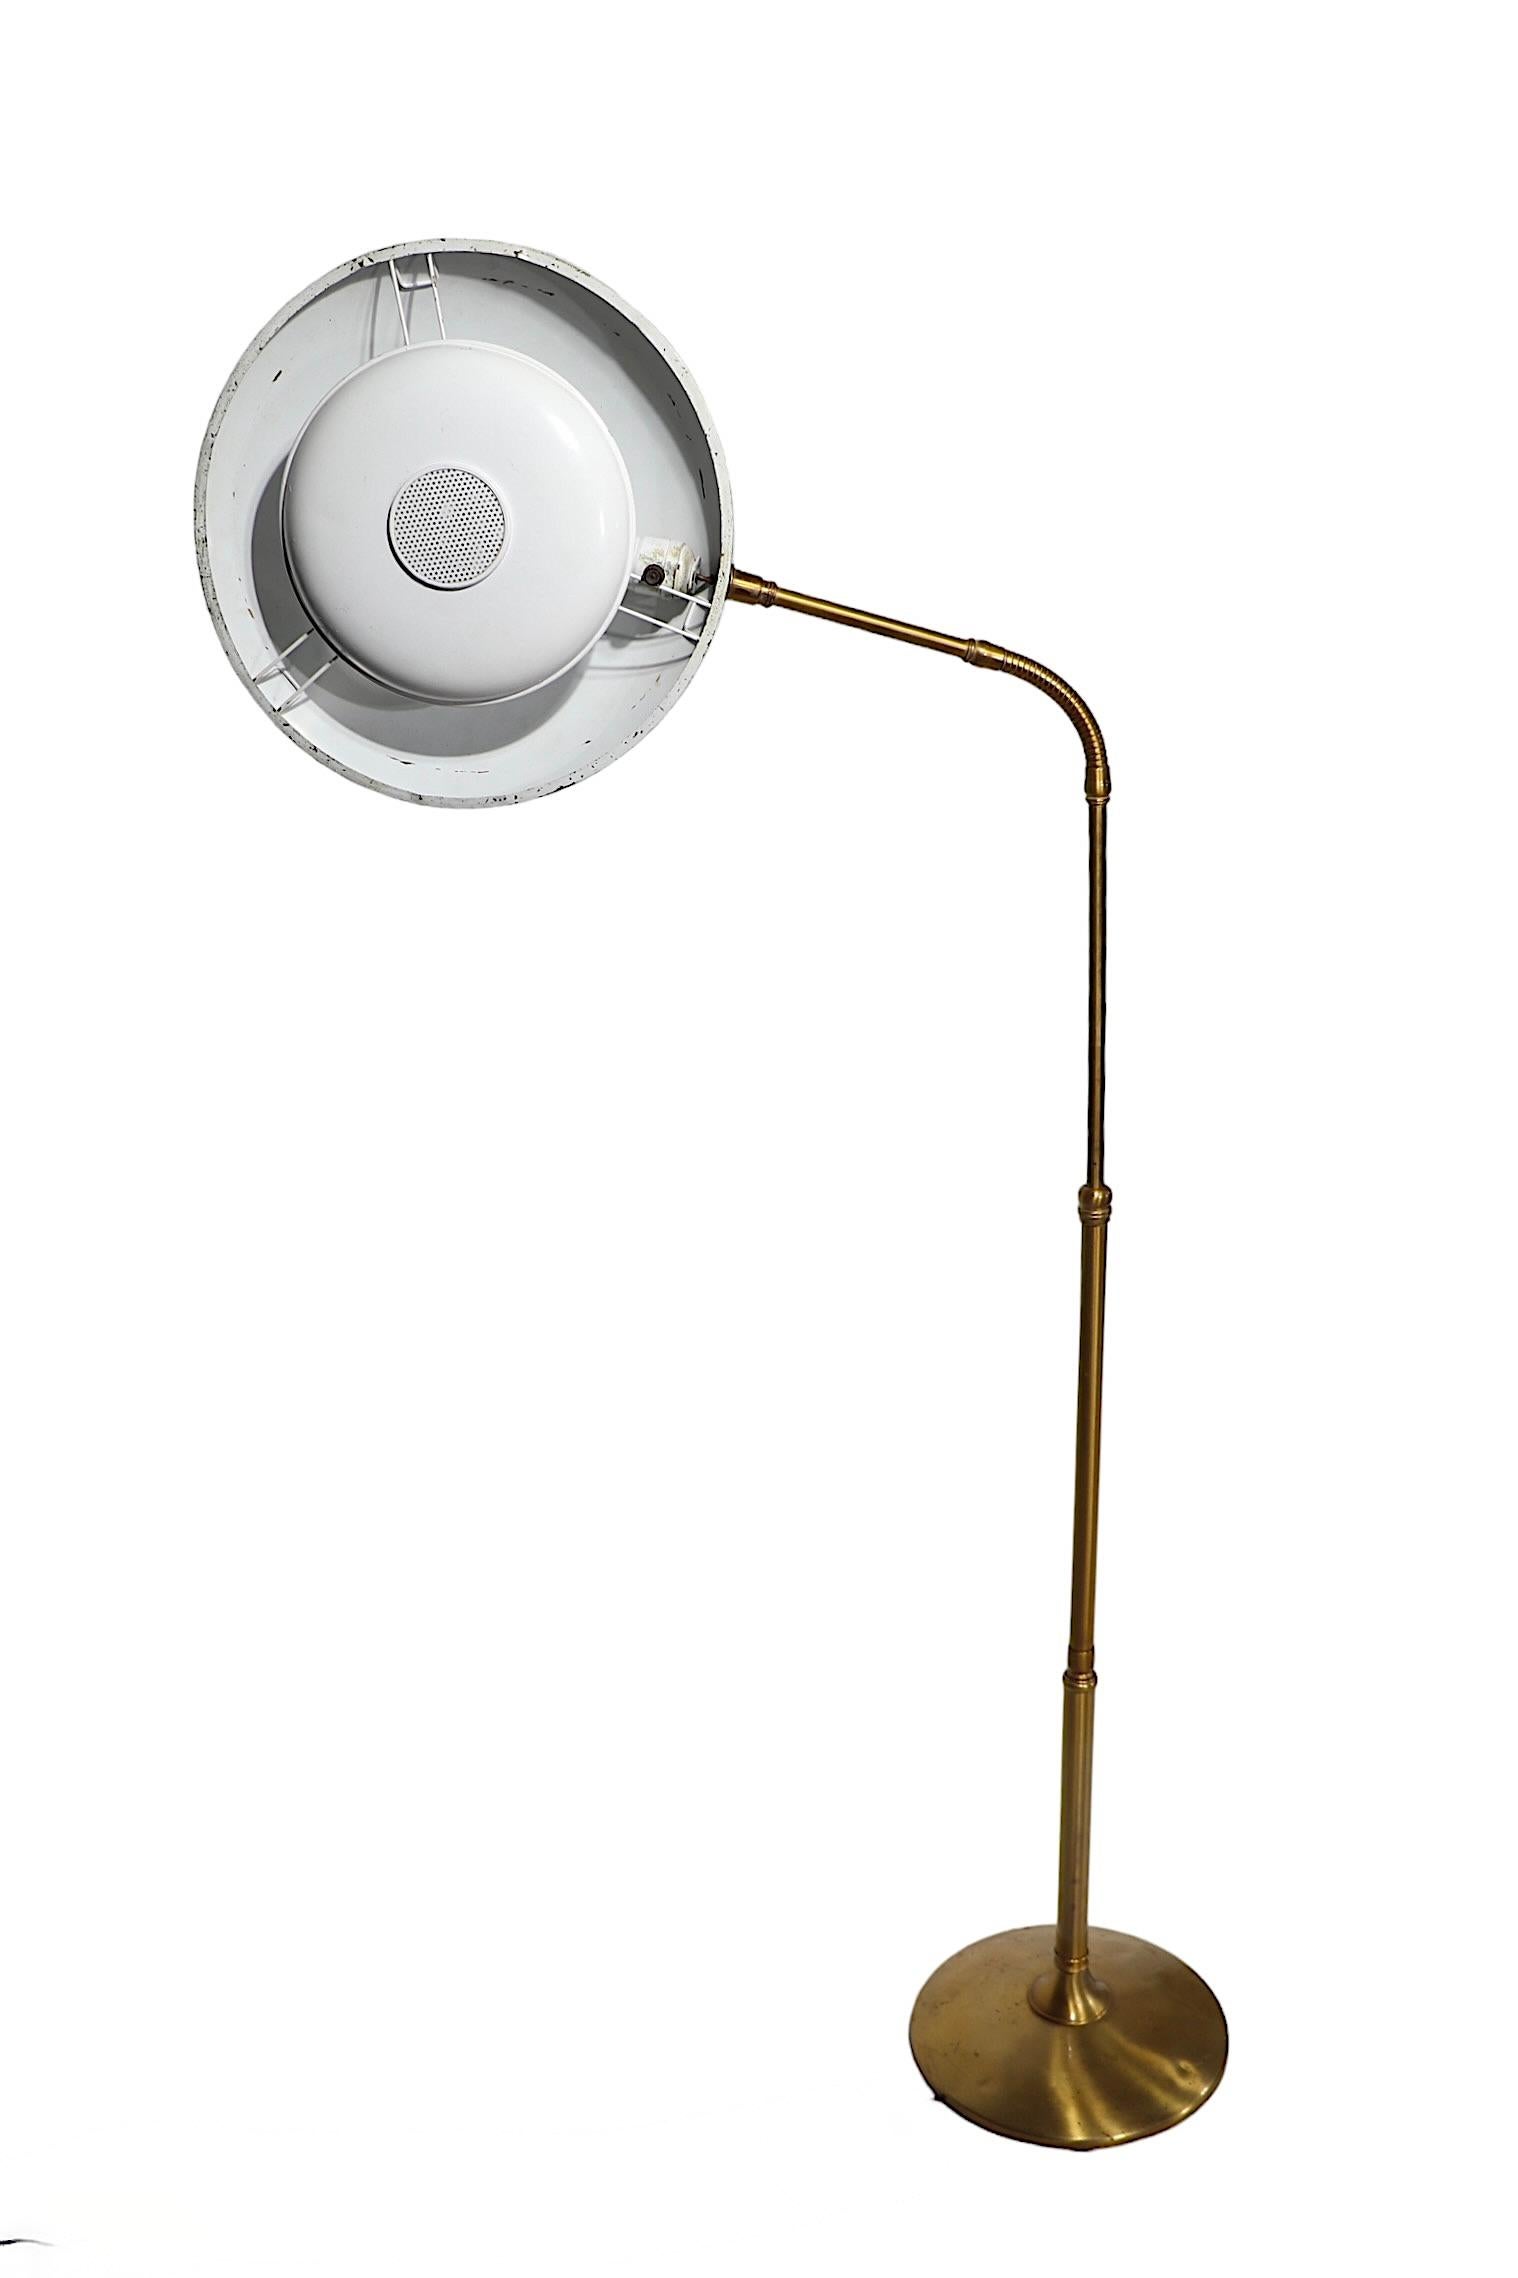 Rare early Mid Century adjustable floor lamp, designed by Gerald Thurston for Lightolier, c 1950/1960. The lamp features the classic saucer shade, with its original diffuser still in place, a flex arm attached to  the vertical pole, on a disk base.